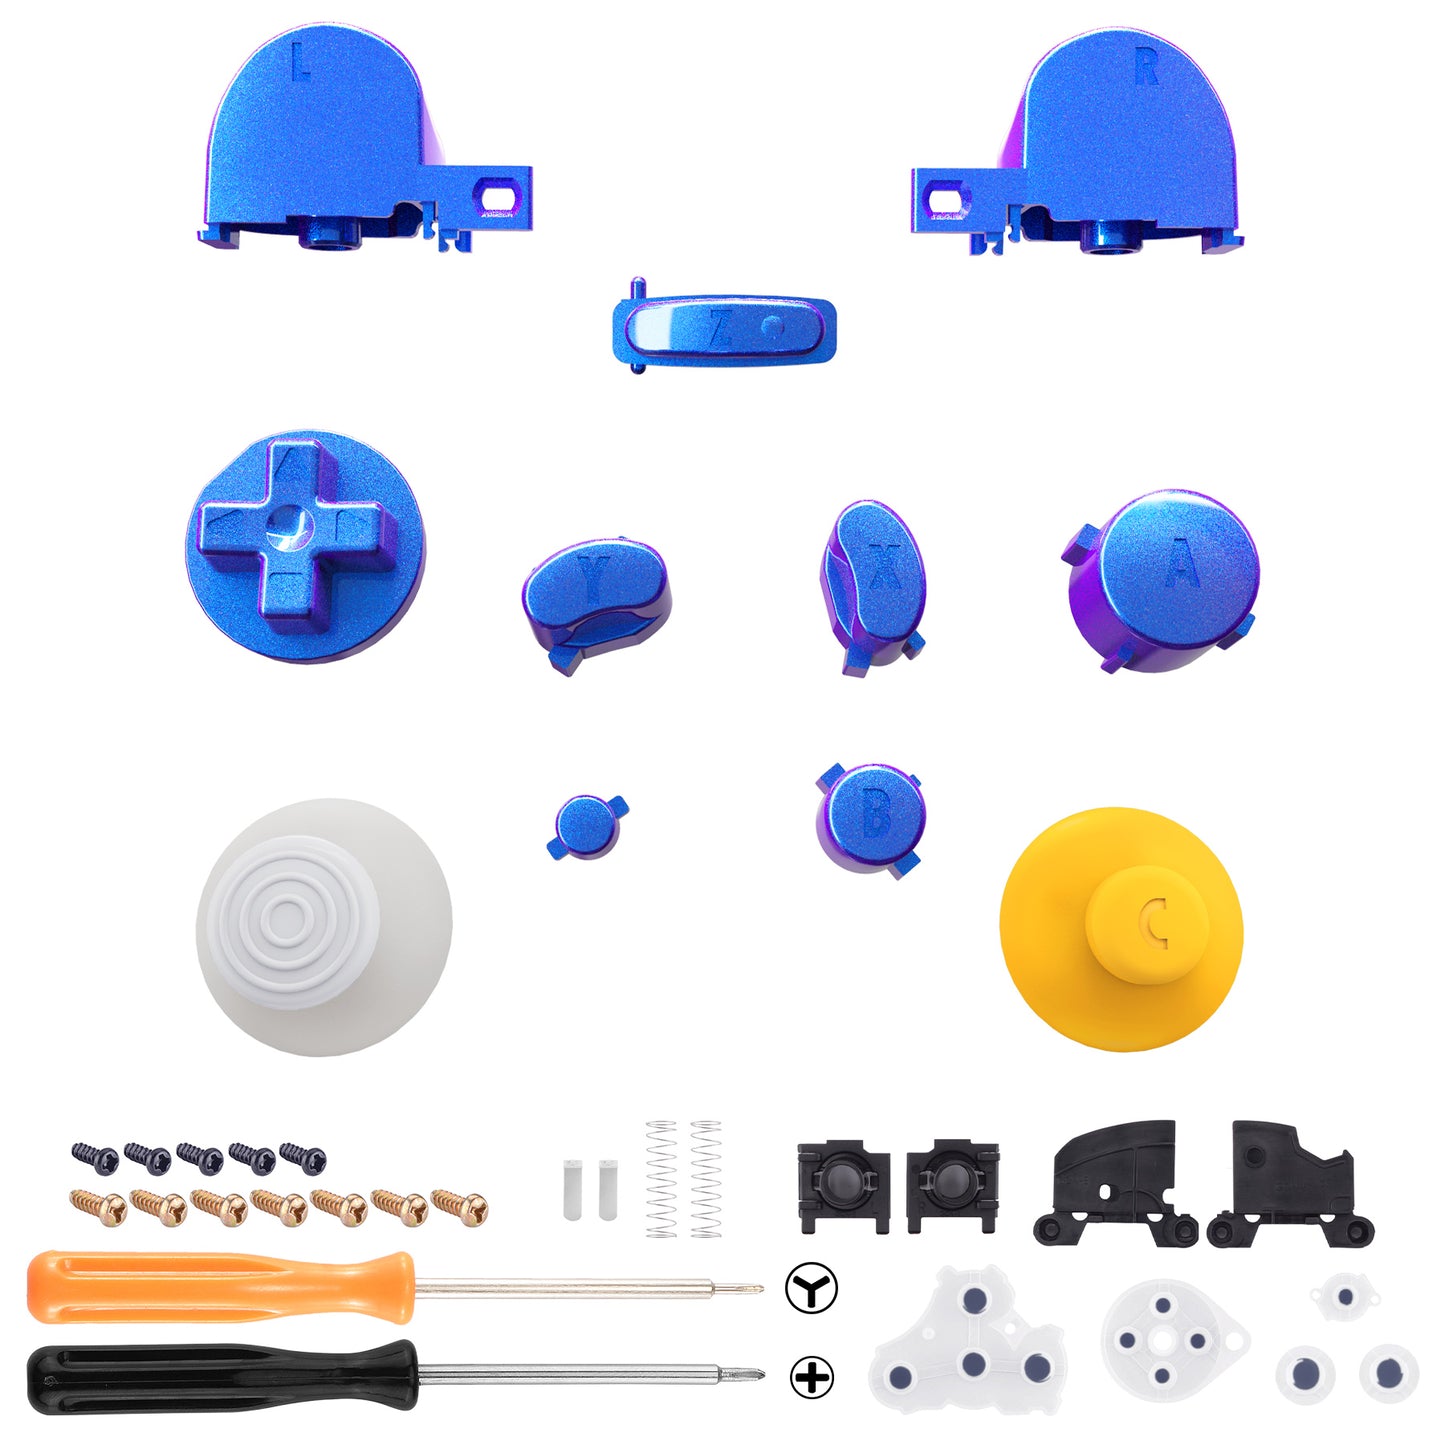 eXtremeRate Retail Chameleon Purple Blue Repair ABXY D-pad Z L R Keys for Nintendo GameCube Controller, DIY Replacement Full Set Buttons Thumbsticks for Nintendo GameCube Controller - Controller NOT Included - GCNJ2003